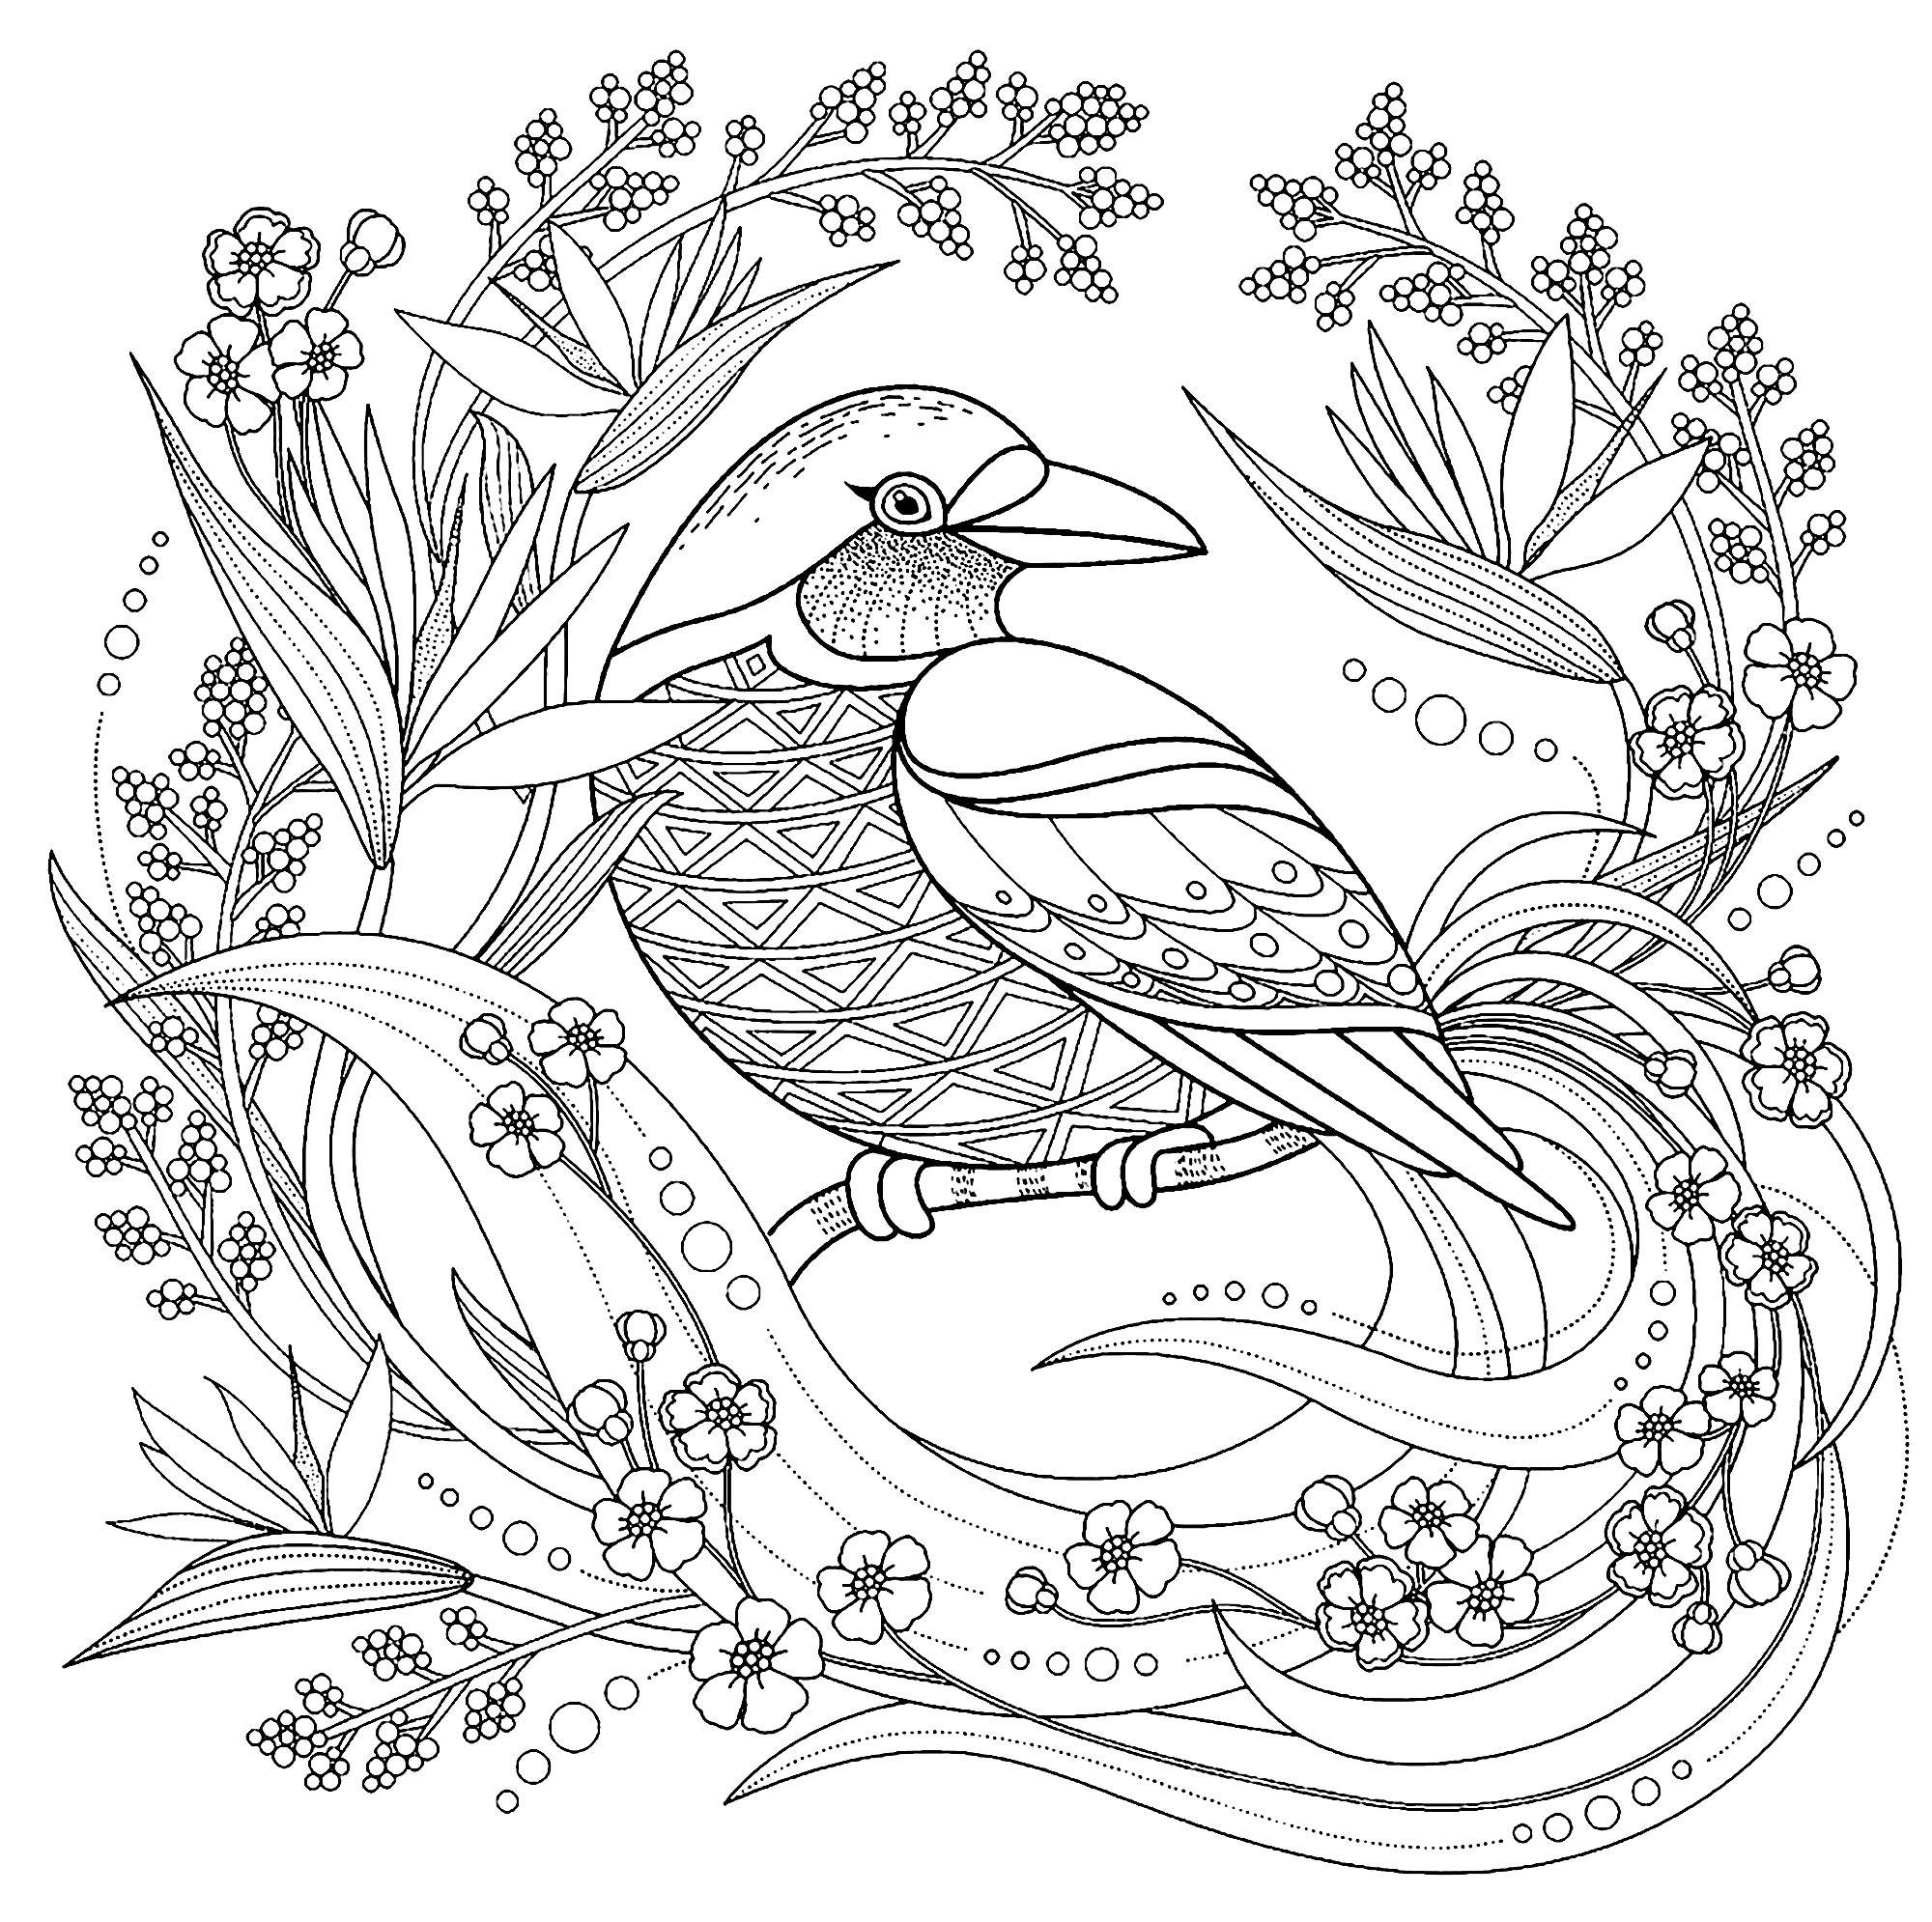 birds-free-to-color-for-children-birds-kids-coloring-pages